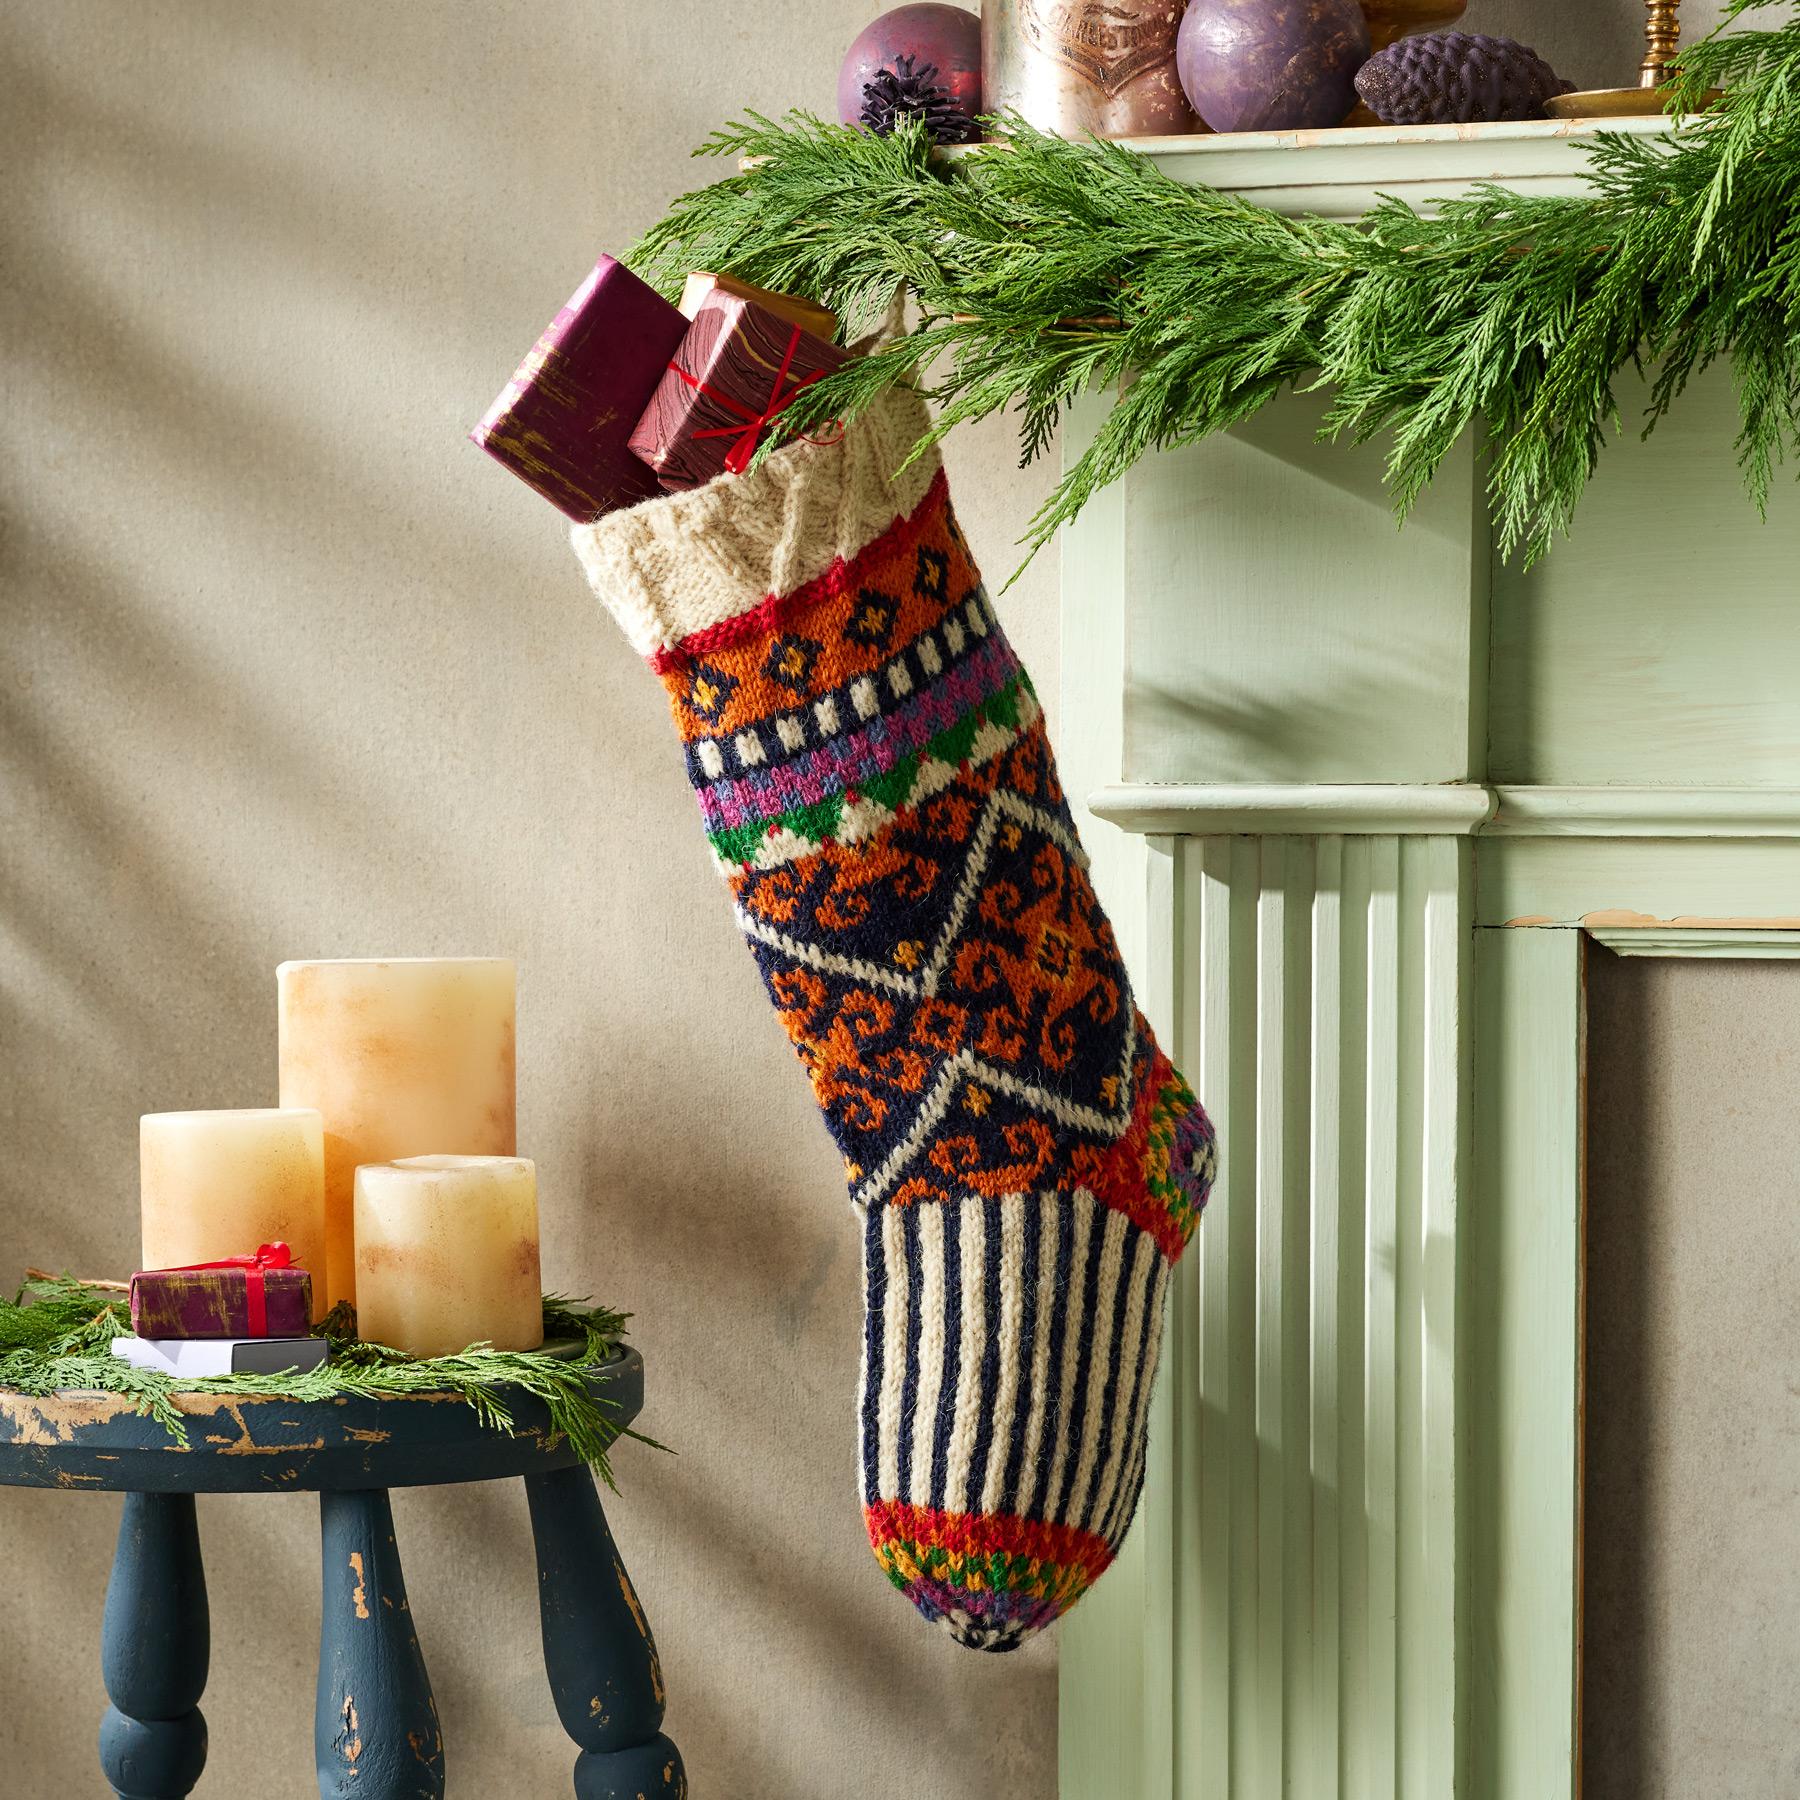  Heirloom Christmas Stockings in Cross-Stitch: From